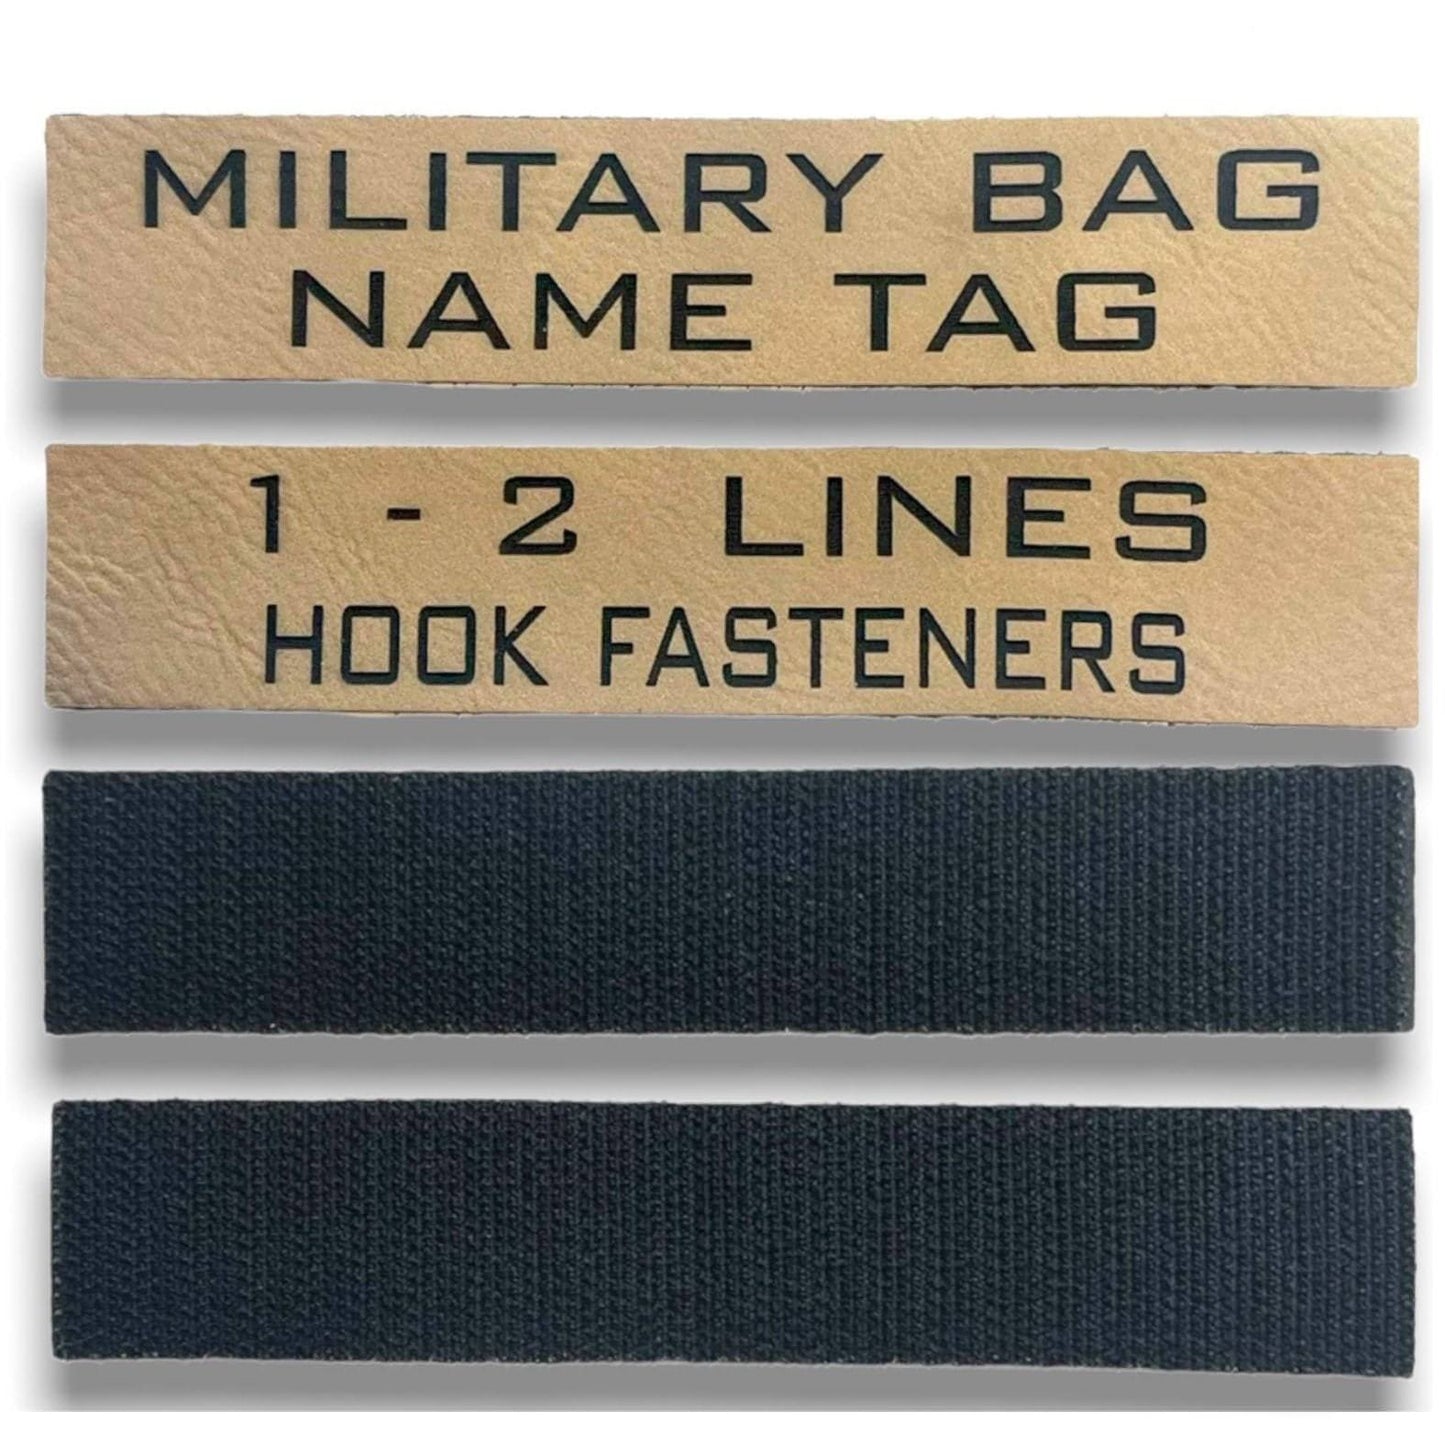 USMC Plate Carrier Flak Patch, W/ Hook Fastener Coyote Brown 